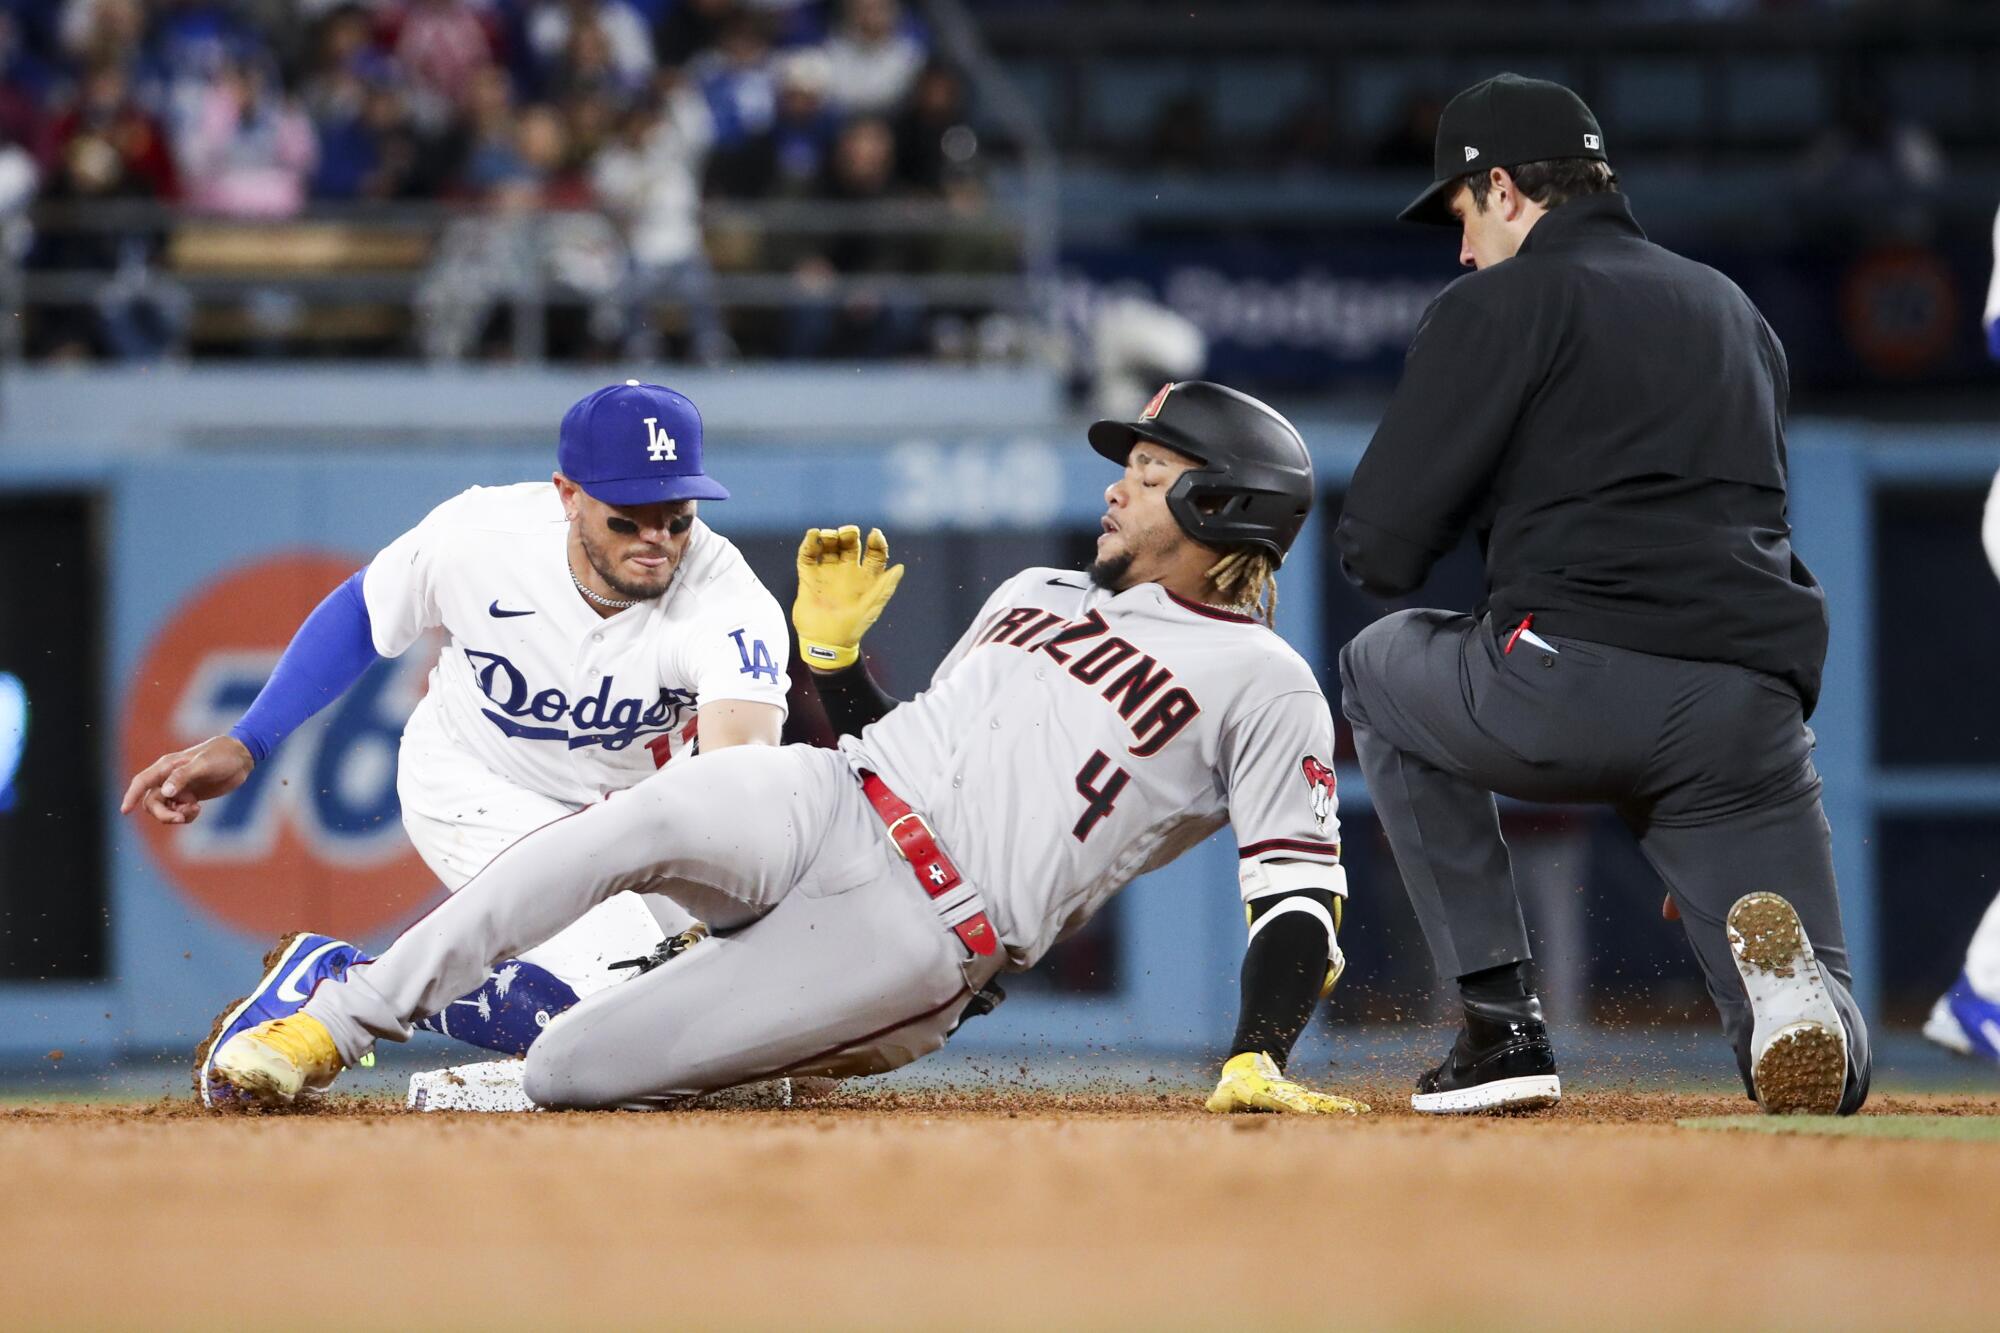 Dodgers shortstop Miguel Rojas, left, tags out Arizona Diamondbacks baserunner Ketel Marte during the sixth inning.